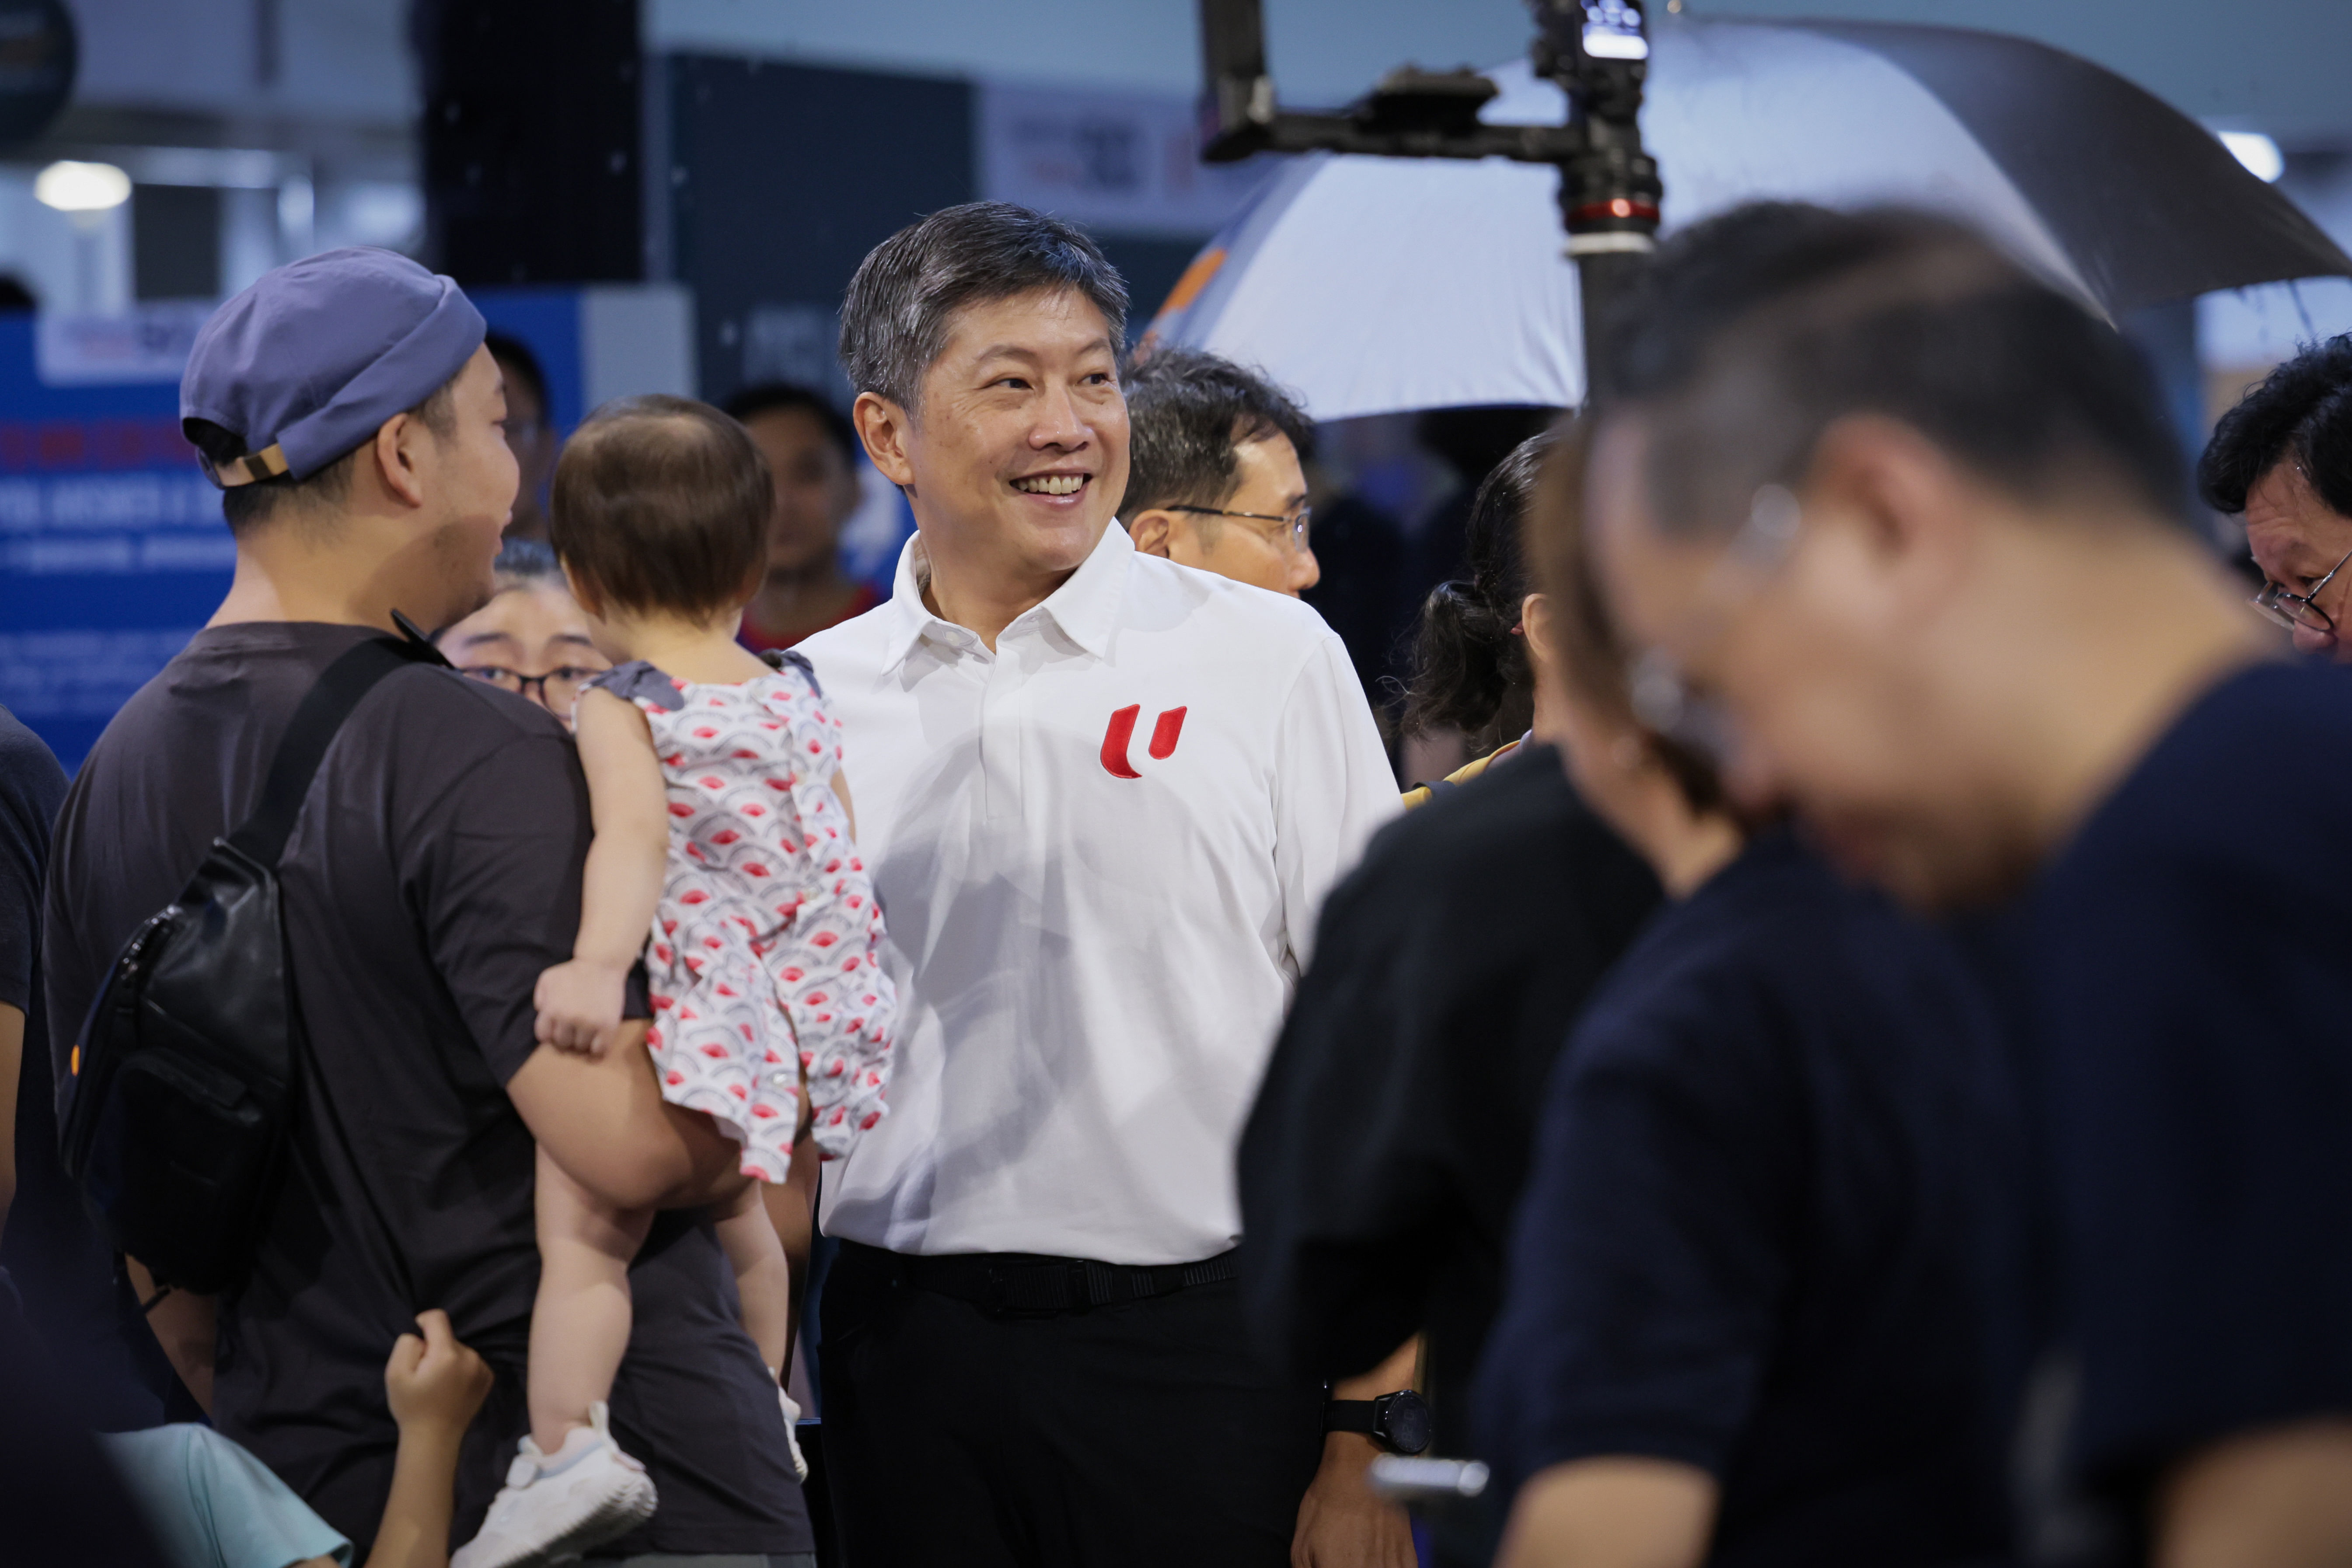 Ng Chee Meng likely to run in PAP stronghold as candidate in next general election: Observers